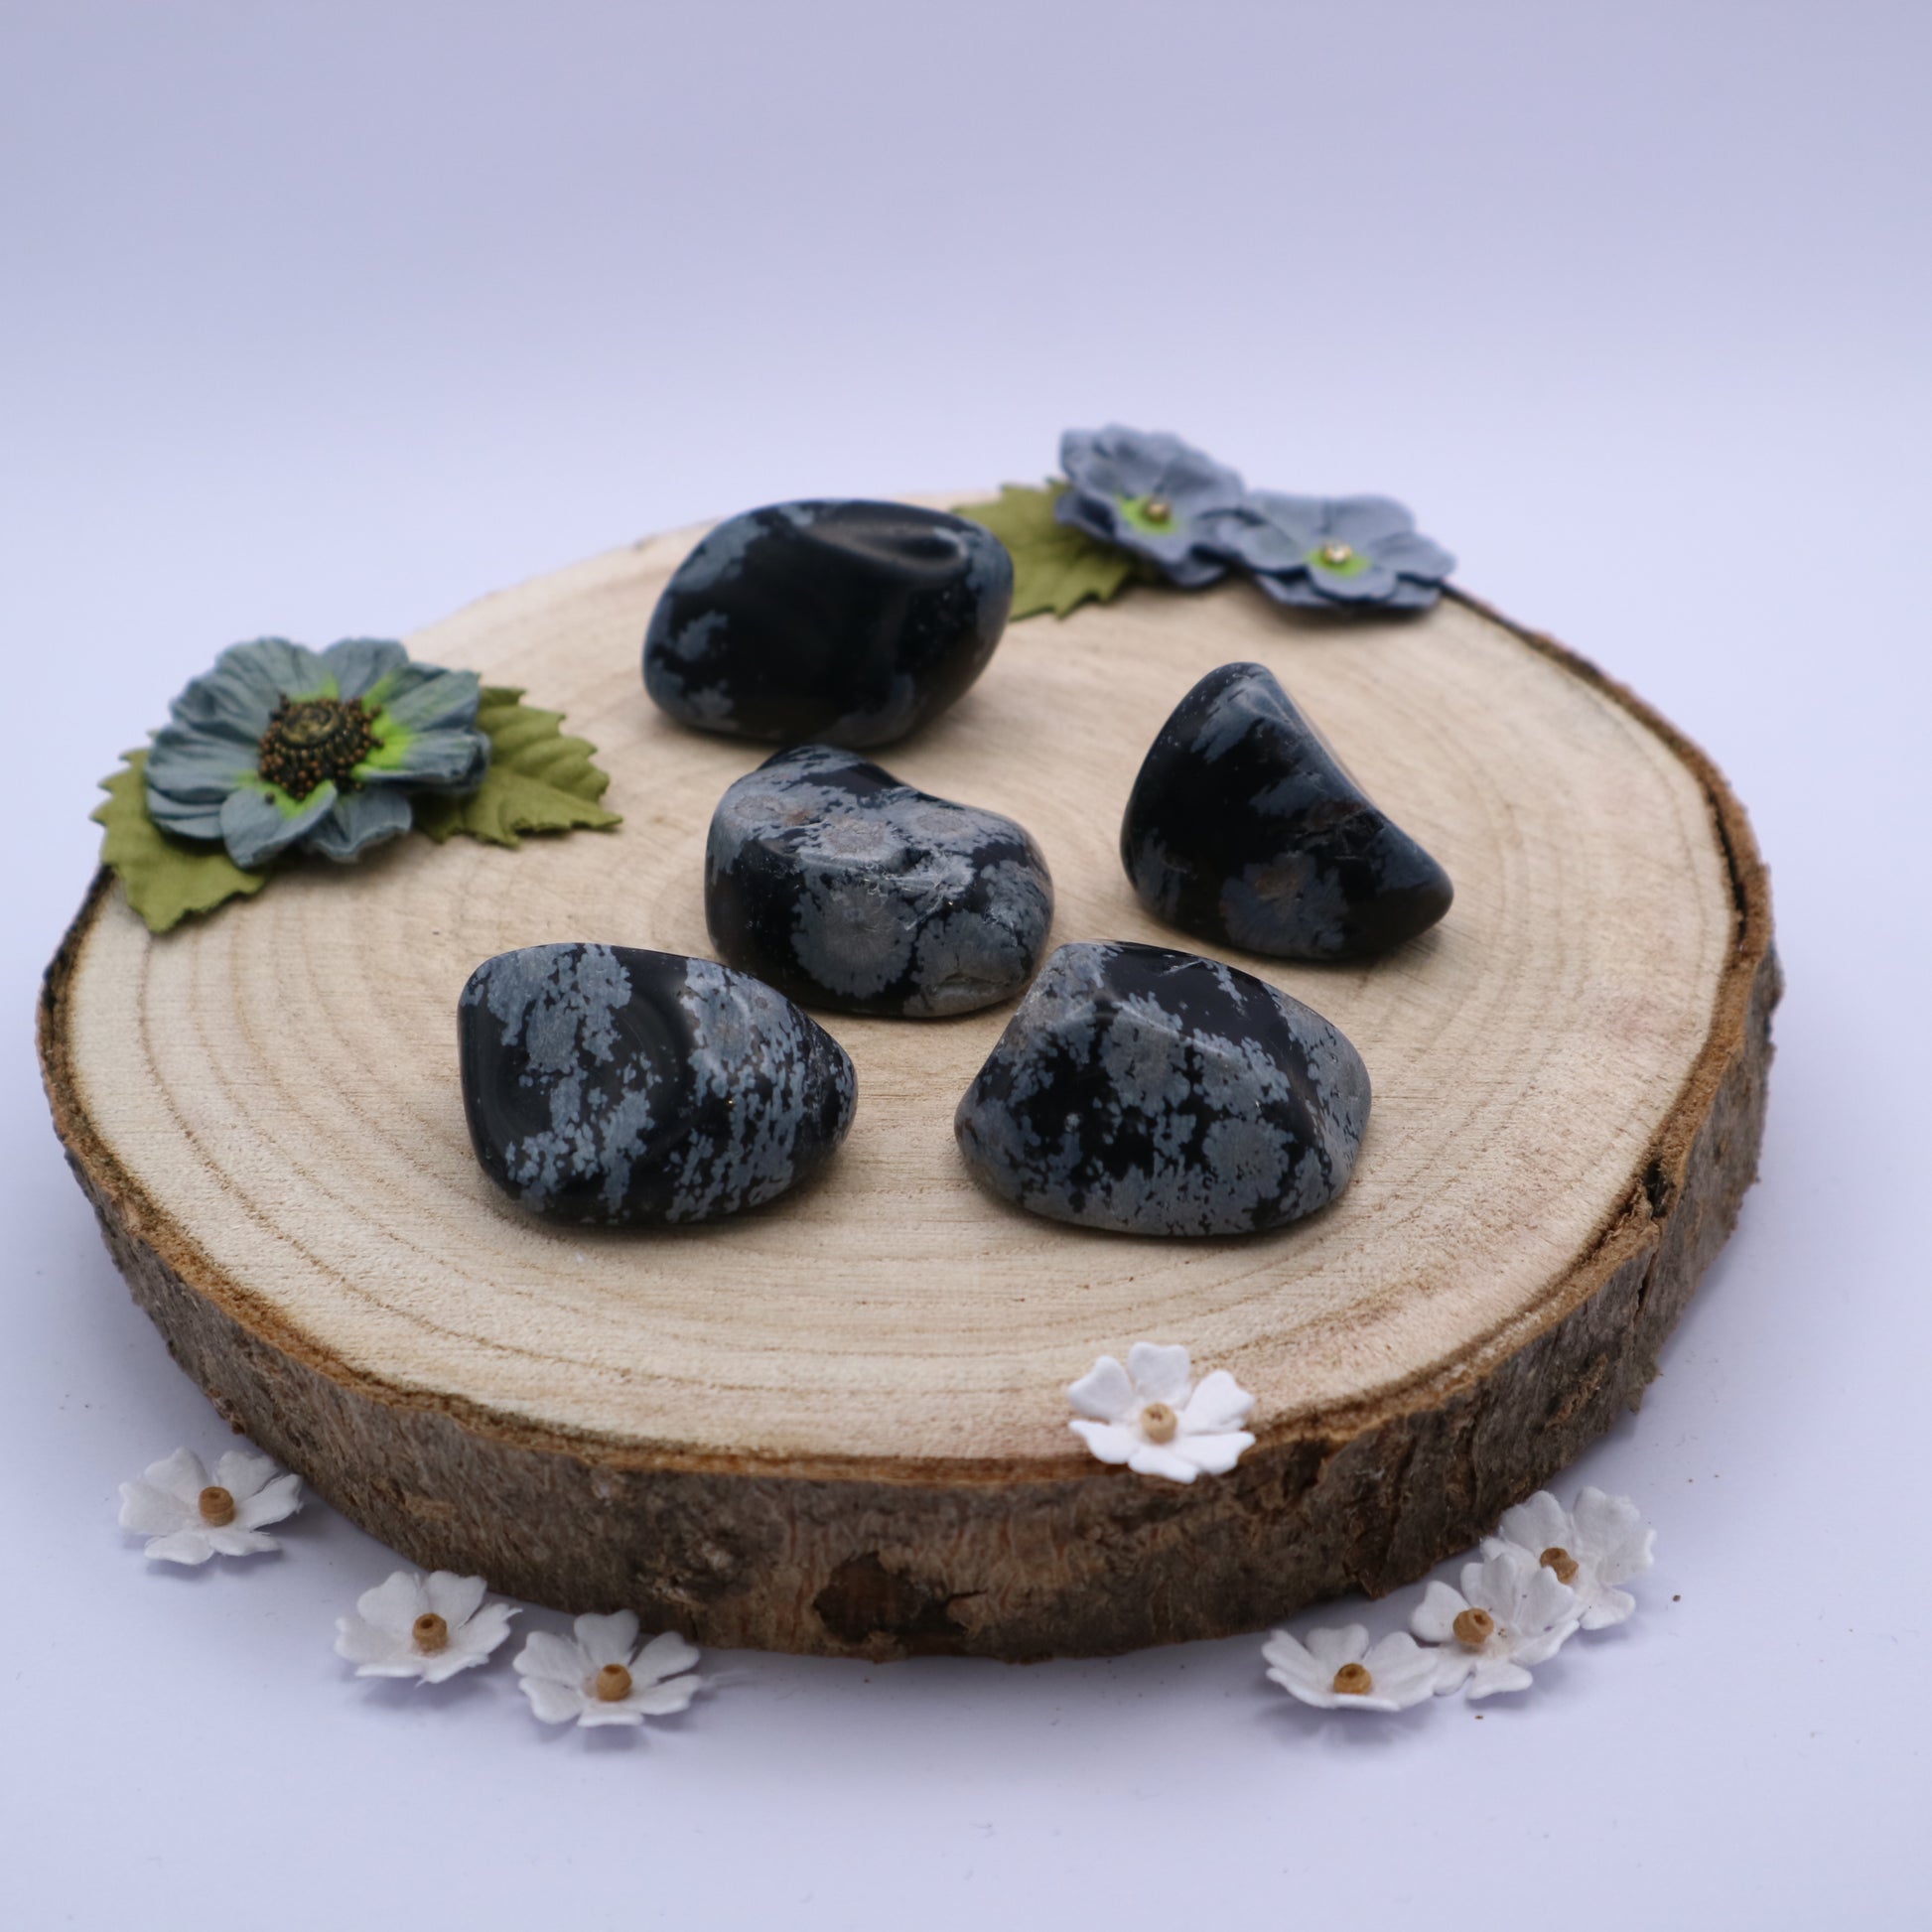 Five pieces of Snowflake Obsidian crystals displayed on a piece of wood surrounded by flowers